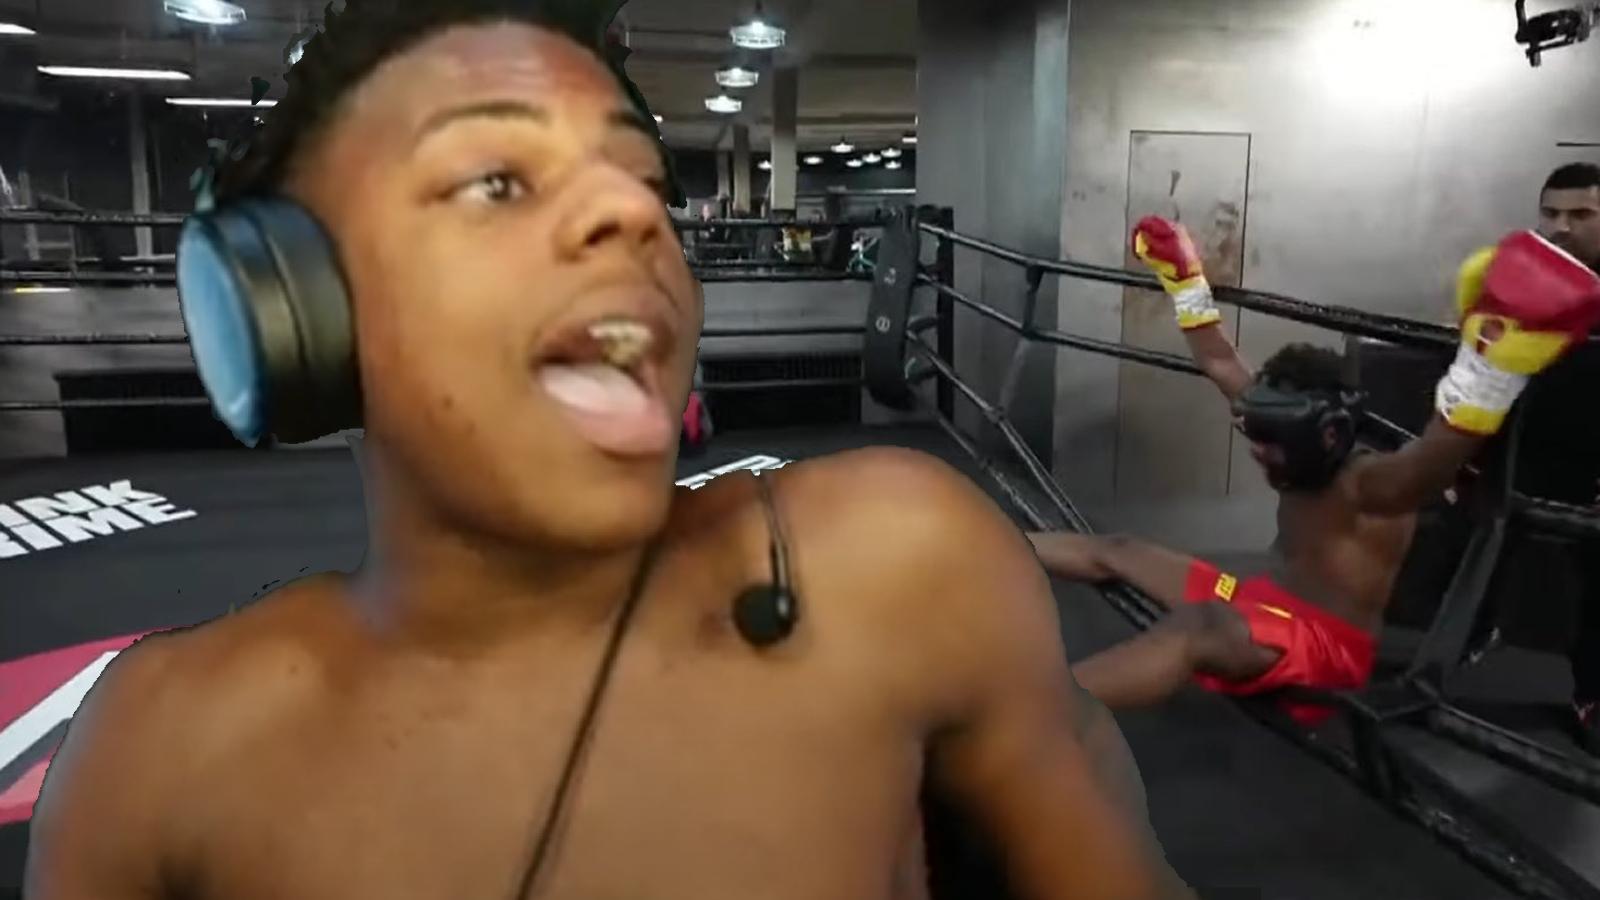 IShowSpeed irate after KSI lil bro'd him during lopsided sparring match 